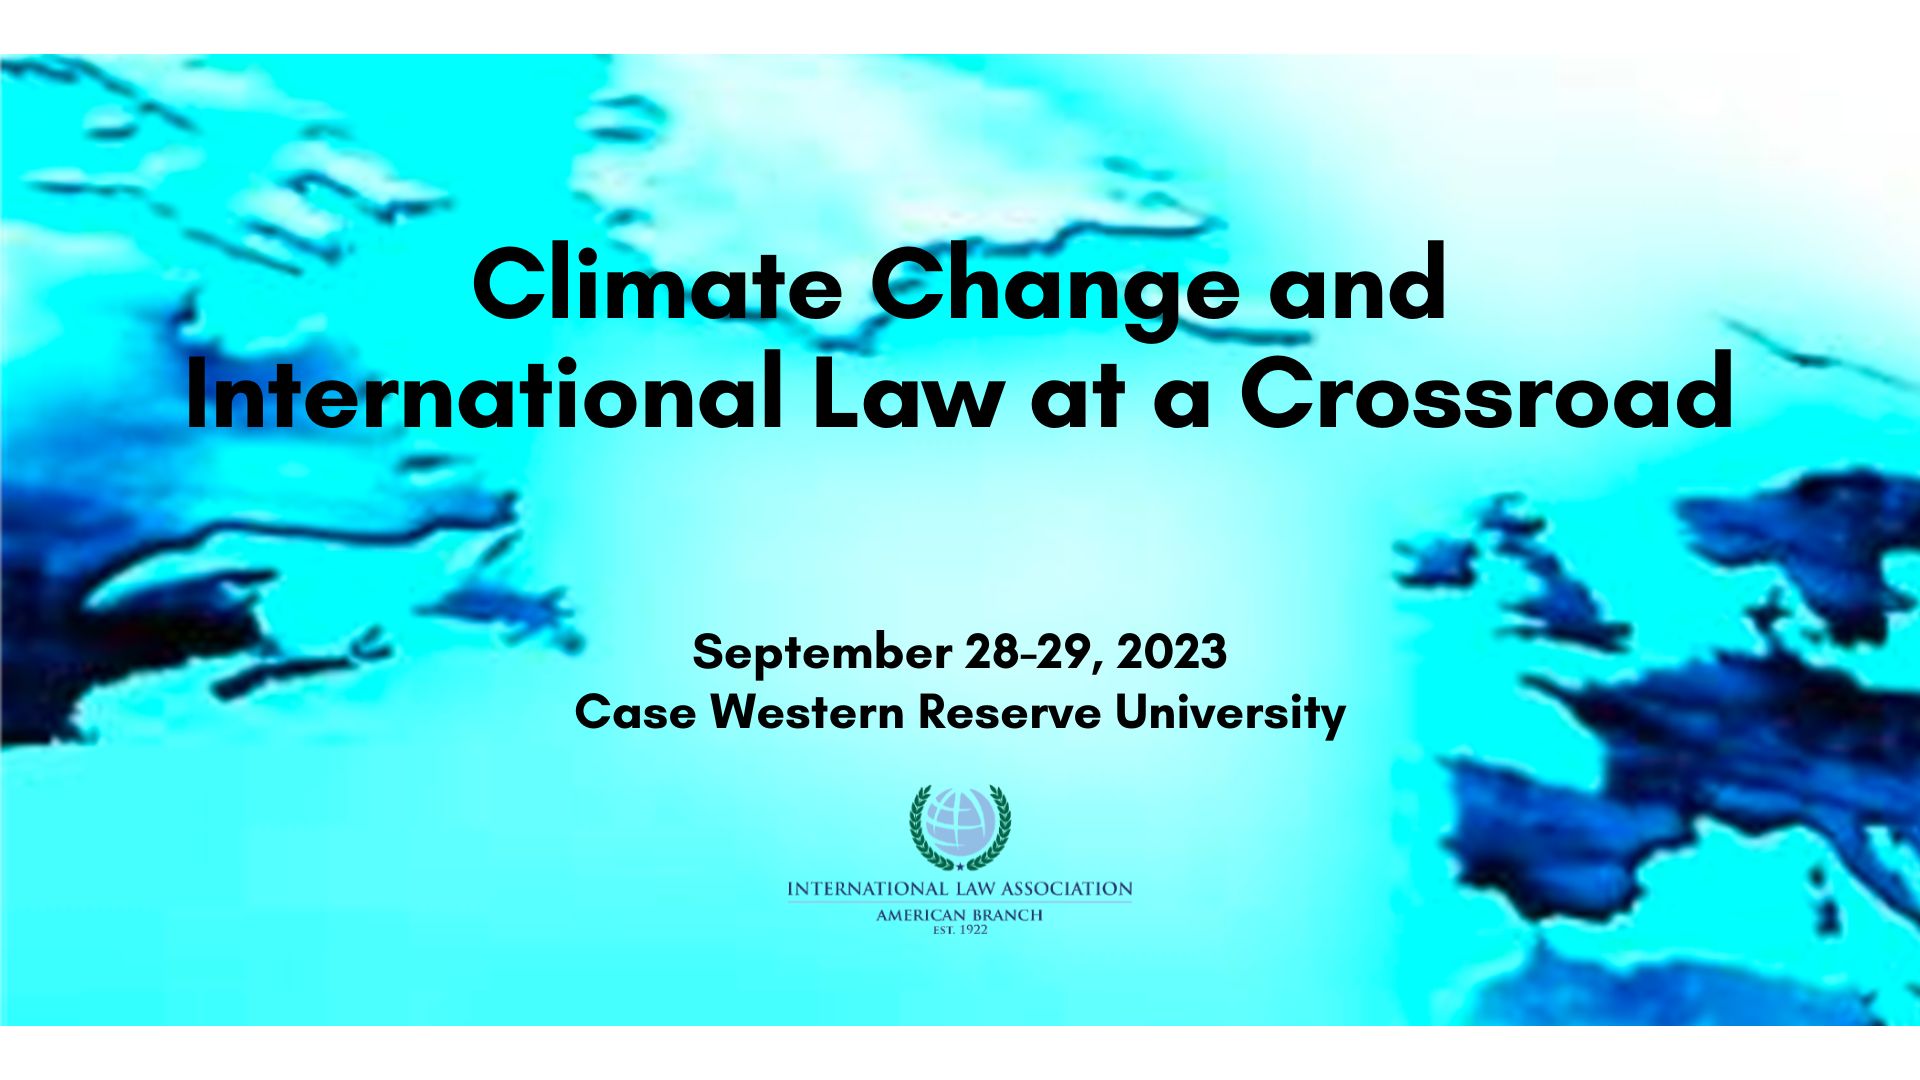 Climate Change and International Law at a Crossroad